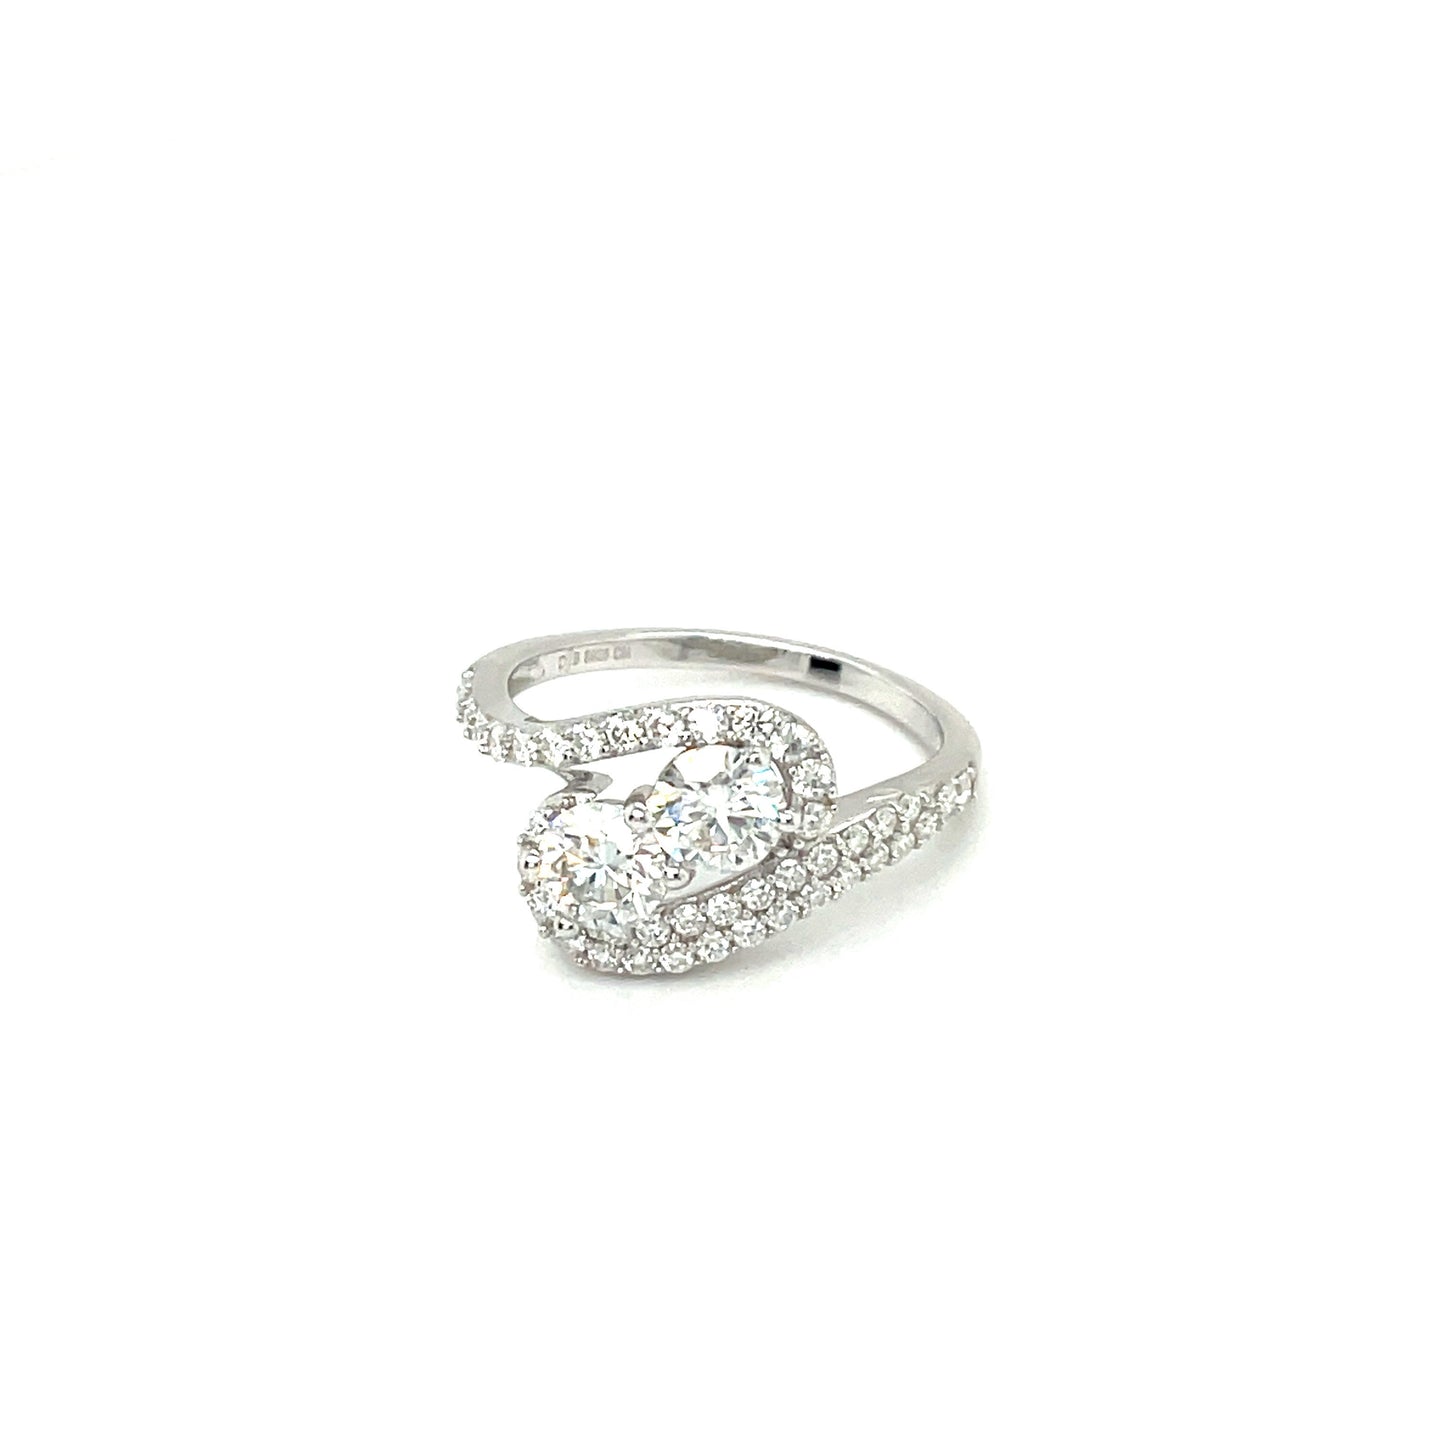 TTT Rhodium Plated, SS Ring w/2 Round and Moissanite Gemstone Accents on a Slanted, Swirl Band.-WH